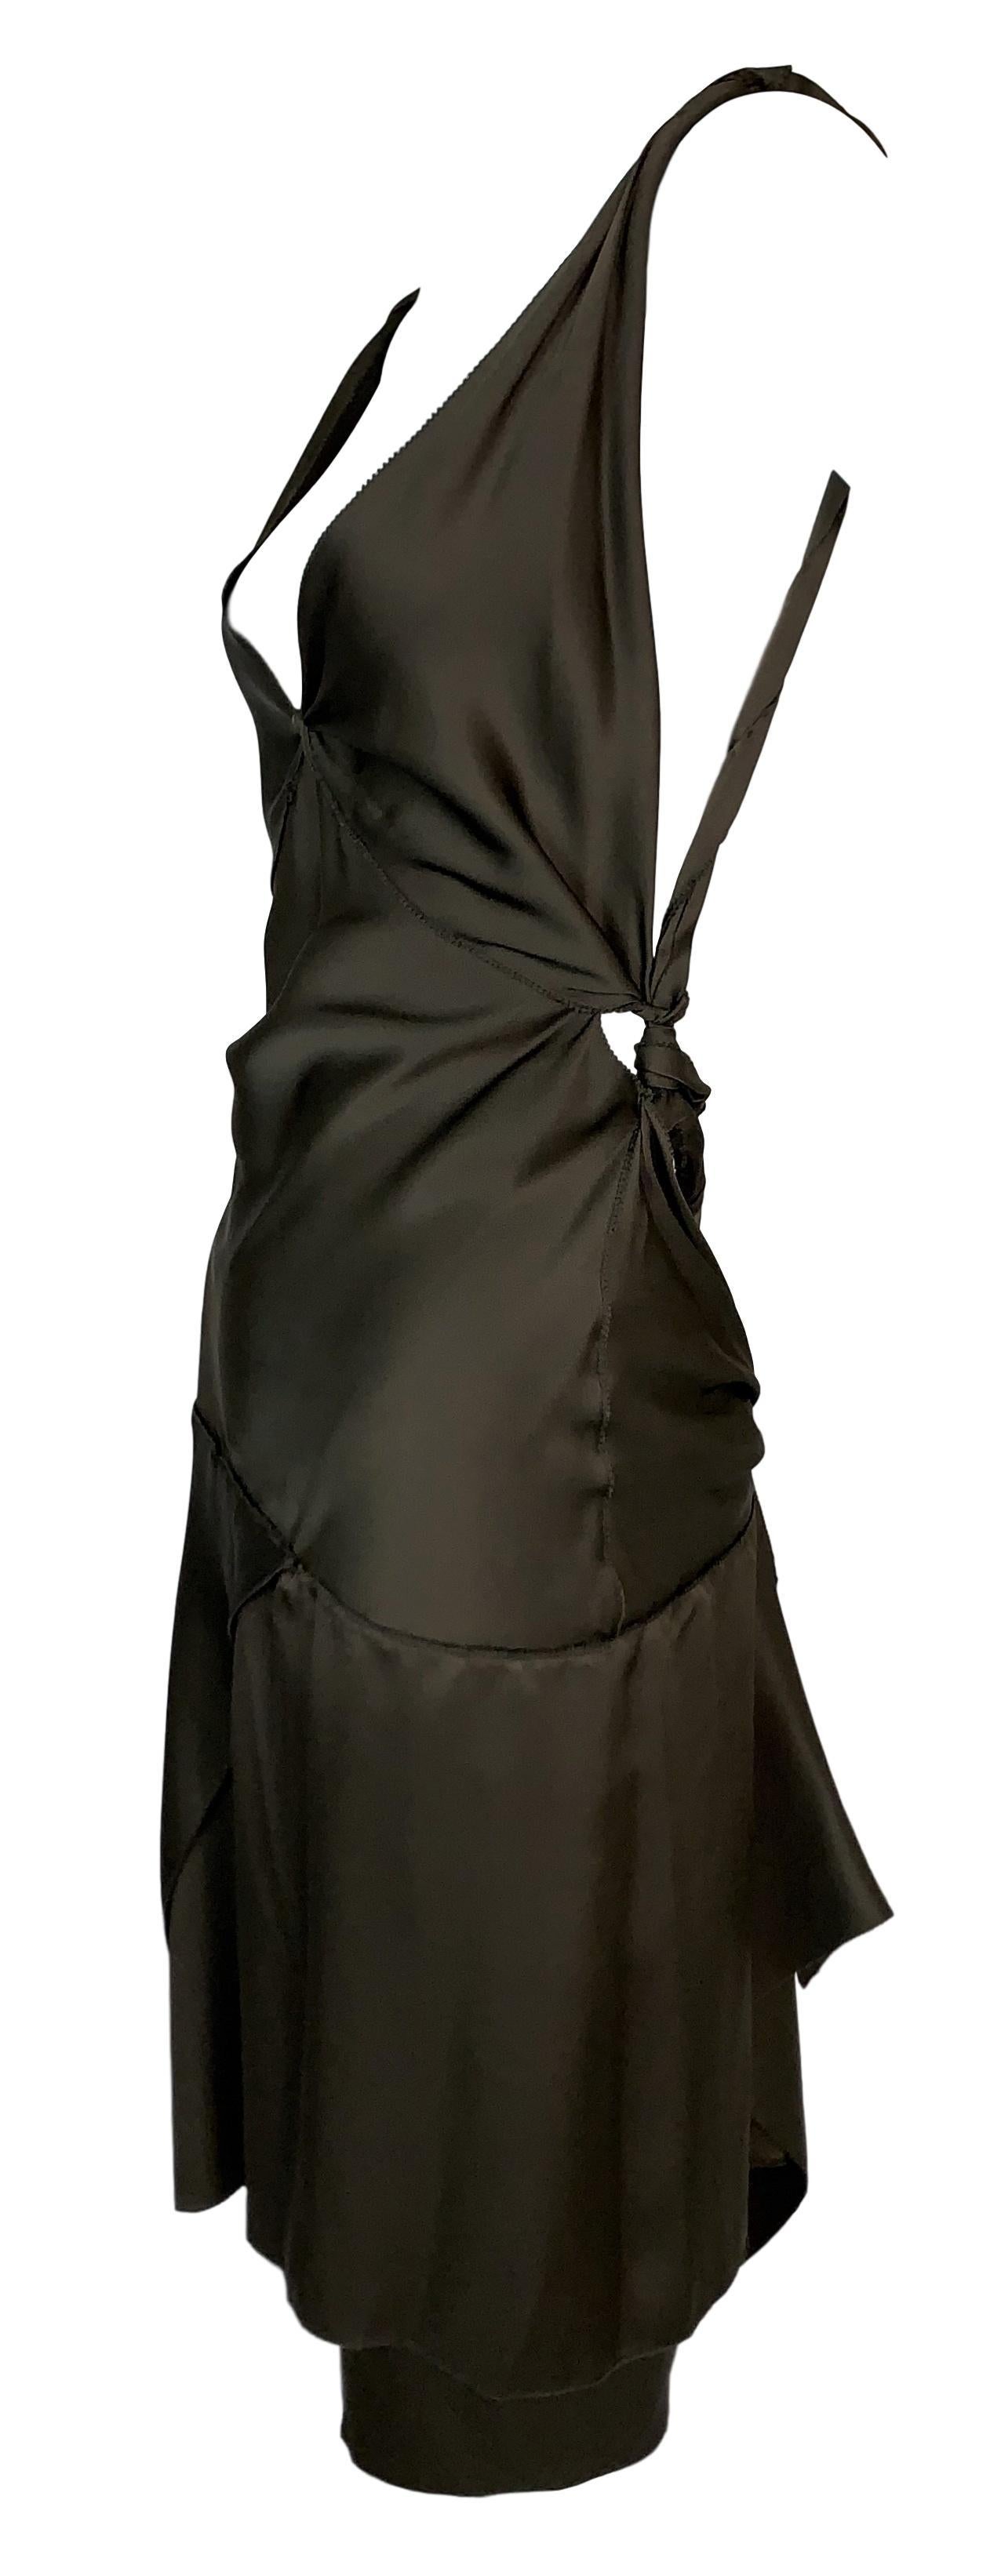 DESIGNER: F/W 2002 Gucci by Tom Ford Runway- its an olive green/brown color

Please contact for more information and/or photos.

CONDITION: Good- minor faint mark inside the dress- see last photo

MATERIAL: tag removed- its silk

COUNTRY MADE: